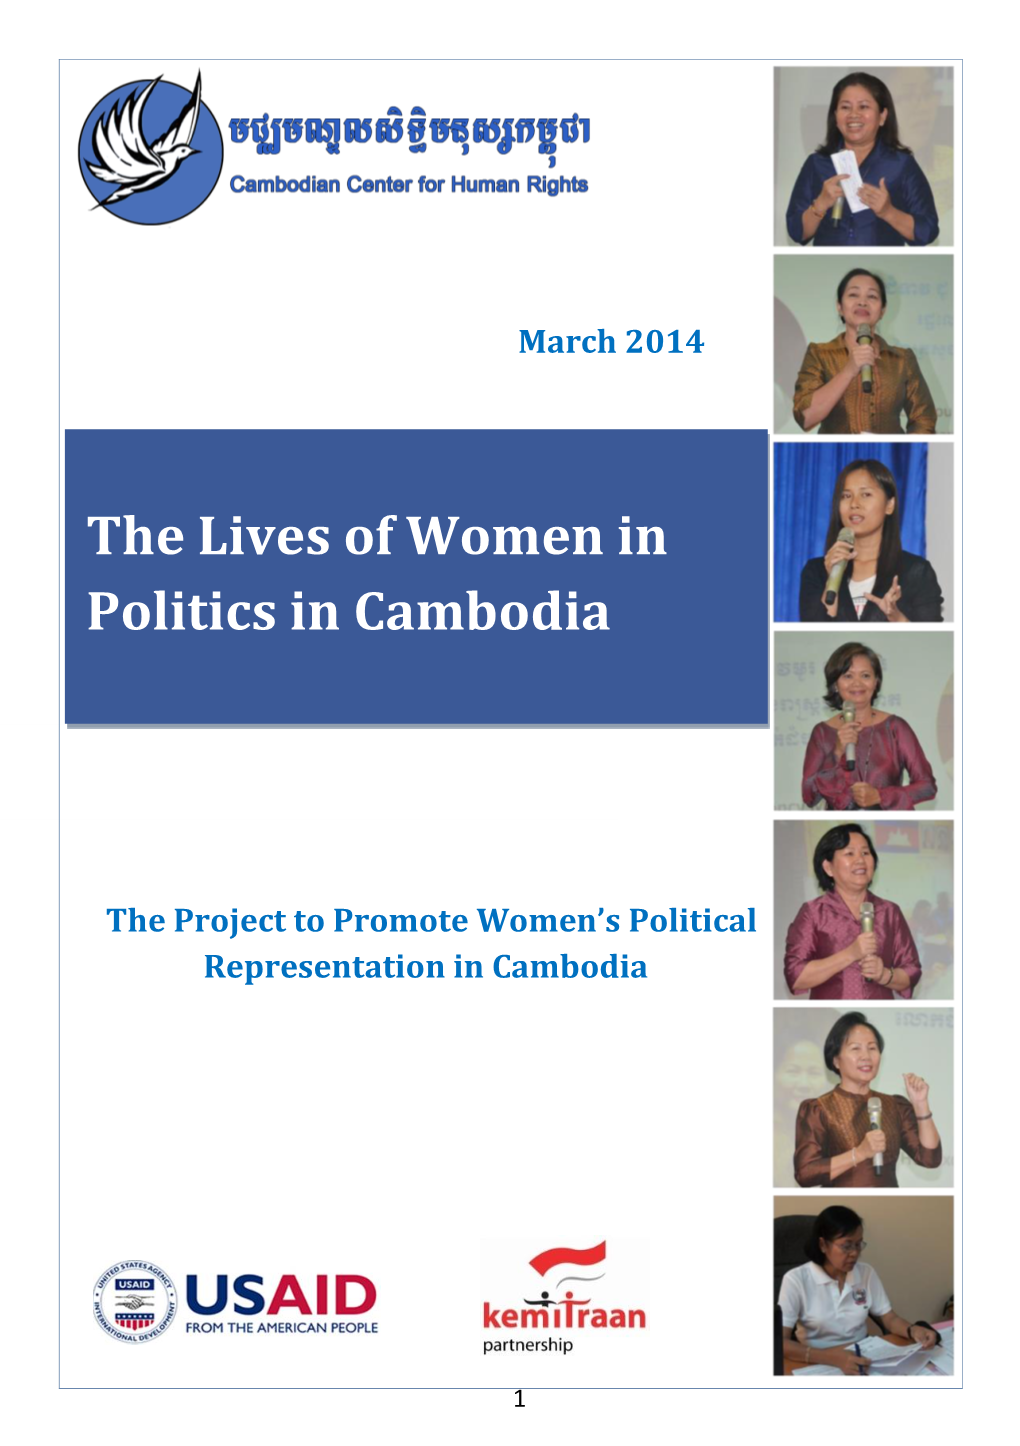 The Lives of Women in Politics in Cambodia” – Is an Output of CCHR’S Project to Promote Women’S Political Representation in Cambodia (The “Project”)